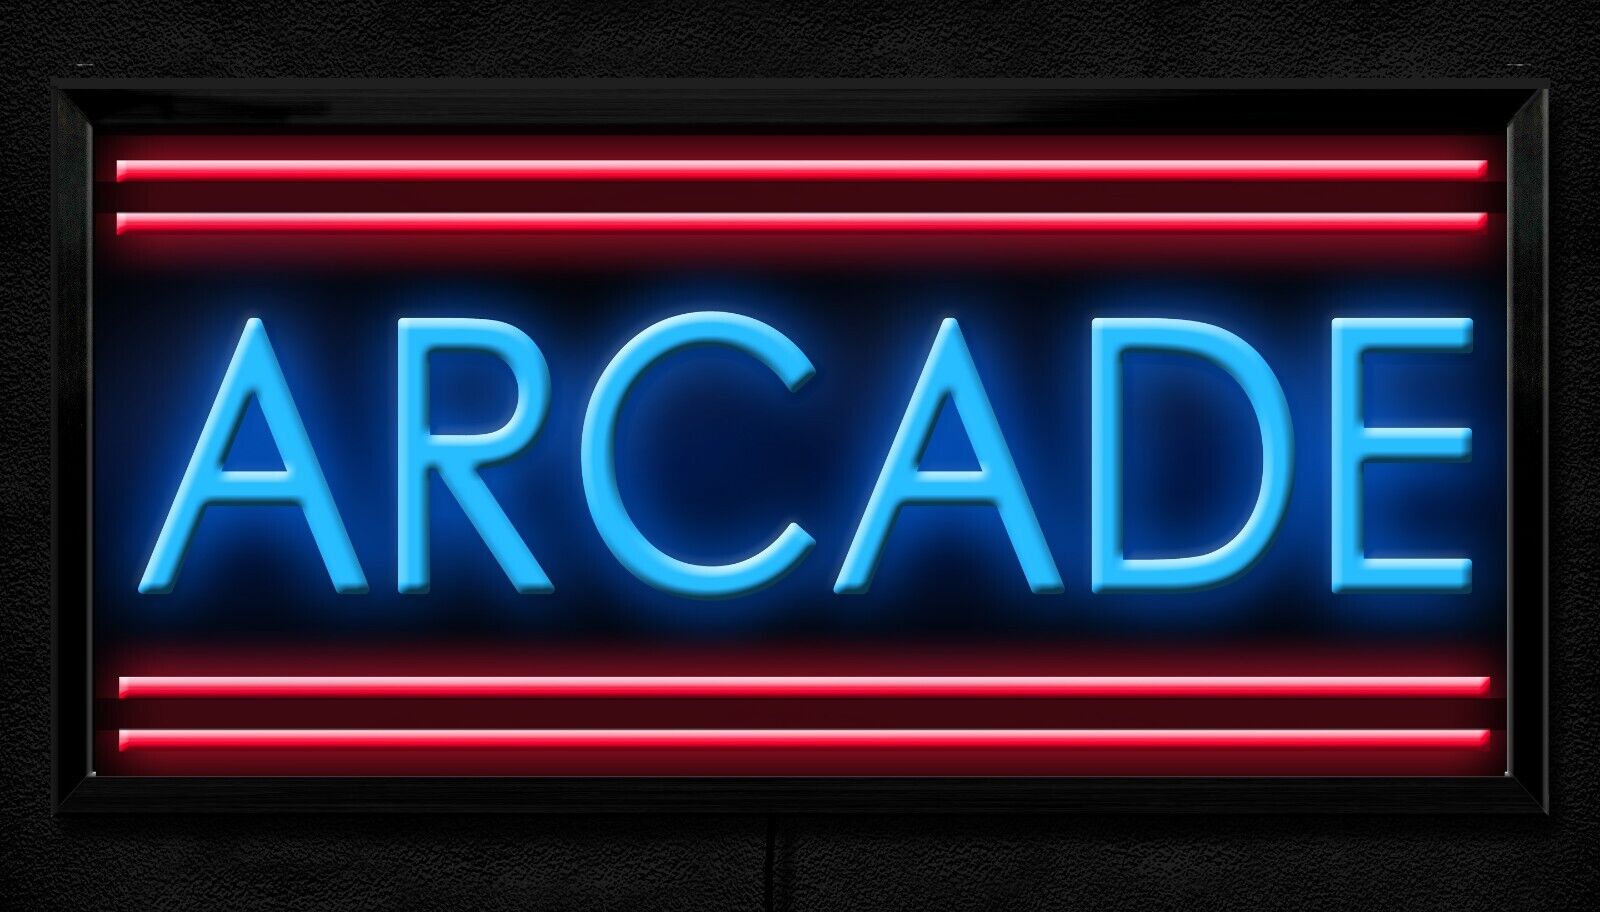 ULTRA BRIGHT LED LIGHTED ARCADE SIGN NEON STYLE GAMING SIGN / BAR SIGN